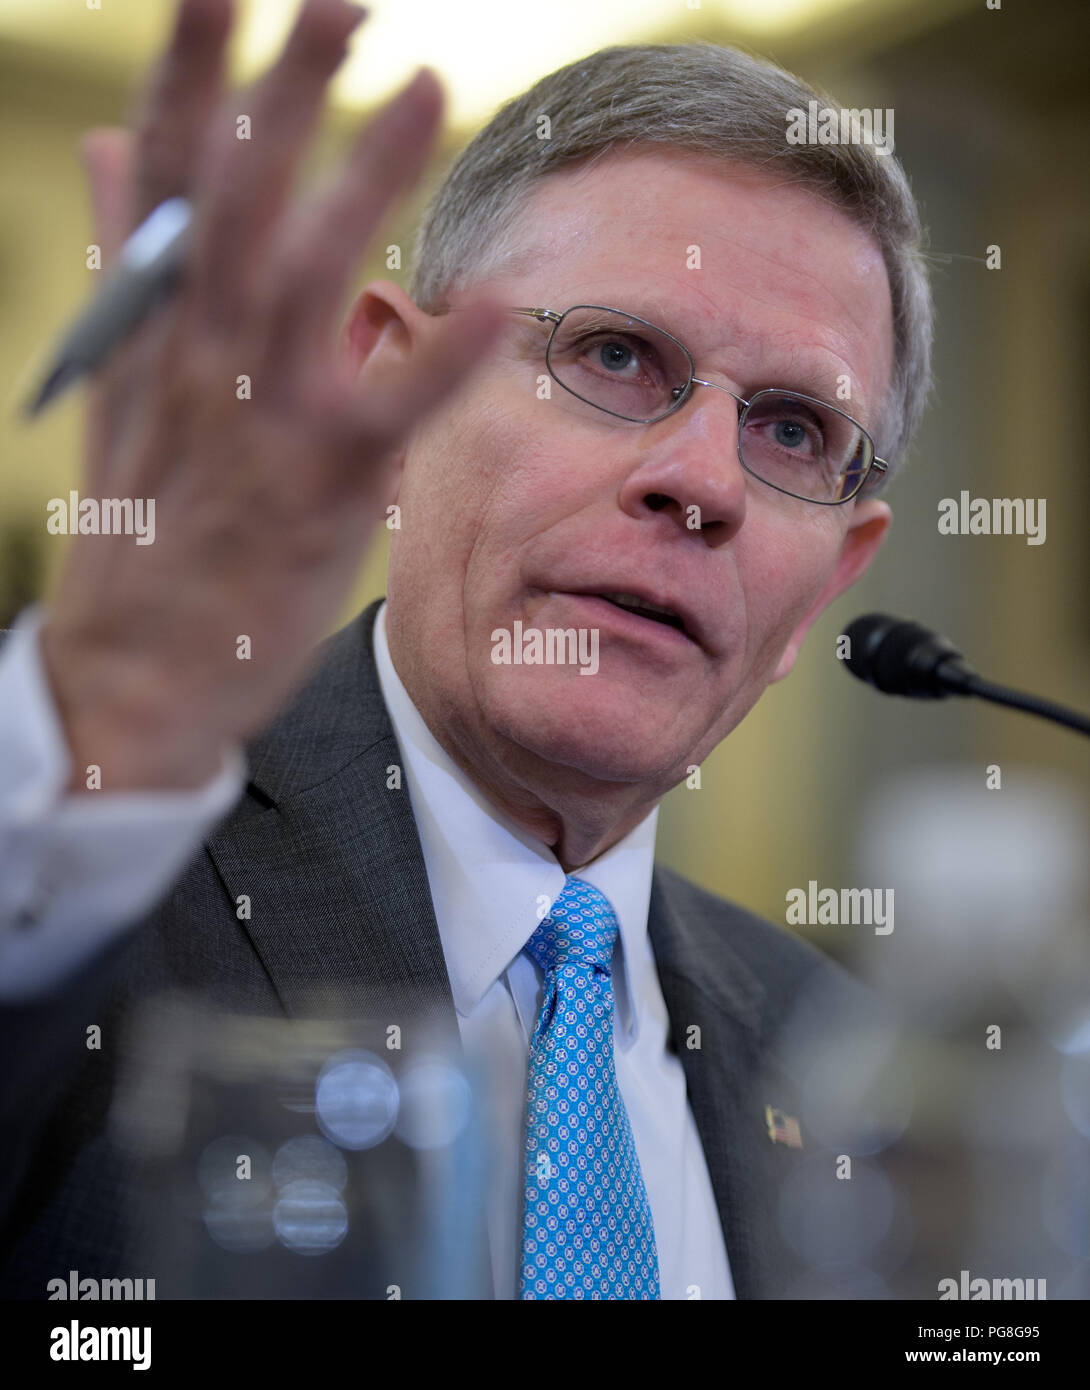 Washington, DC, USA. 23rd Aug, 2018. Dr. Kelvin Droegemeier of Oklahoma appears before the Senate Committee on Commerce, Science, and Transportation as the nominee to be the Director of the Office of Science and Technology Policy on Thursday, Aug. 23, 2018 in the Russell Senate Office Building in Washington. Photo Credit: (NASA/Bill Ingalls) National Aeronautics and Space Administration via globallookpress.com Credit: National Aeronautics And Space A/Russian Look/ZUMA Wire/Alamy Live News Stock Photo